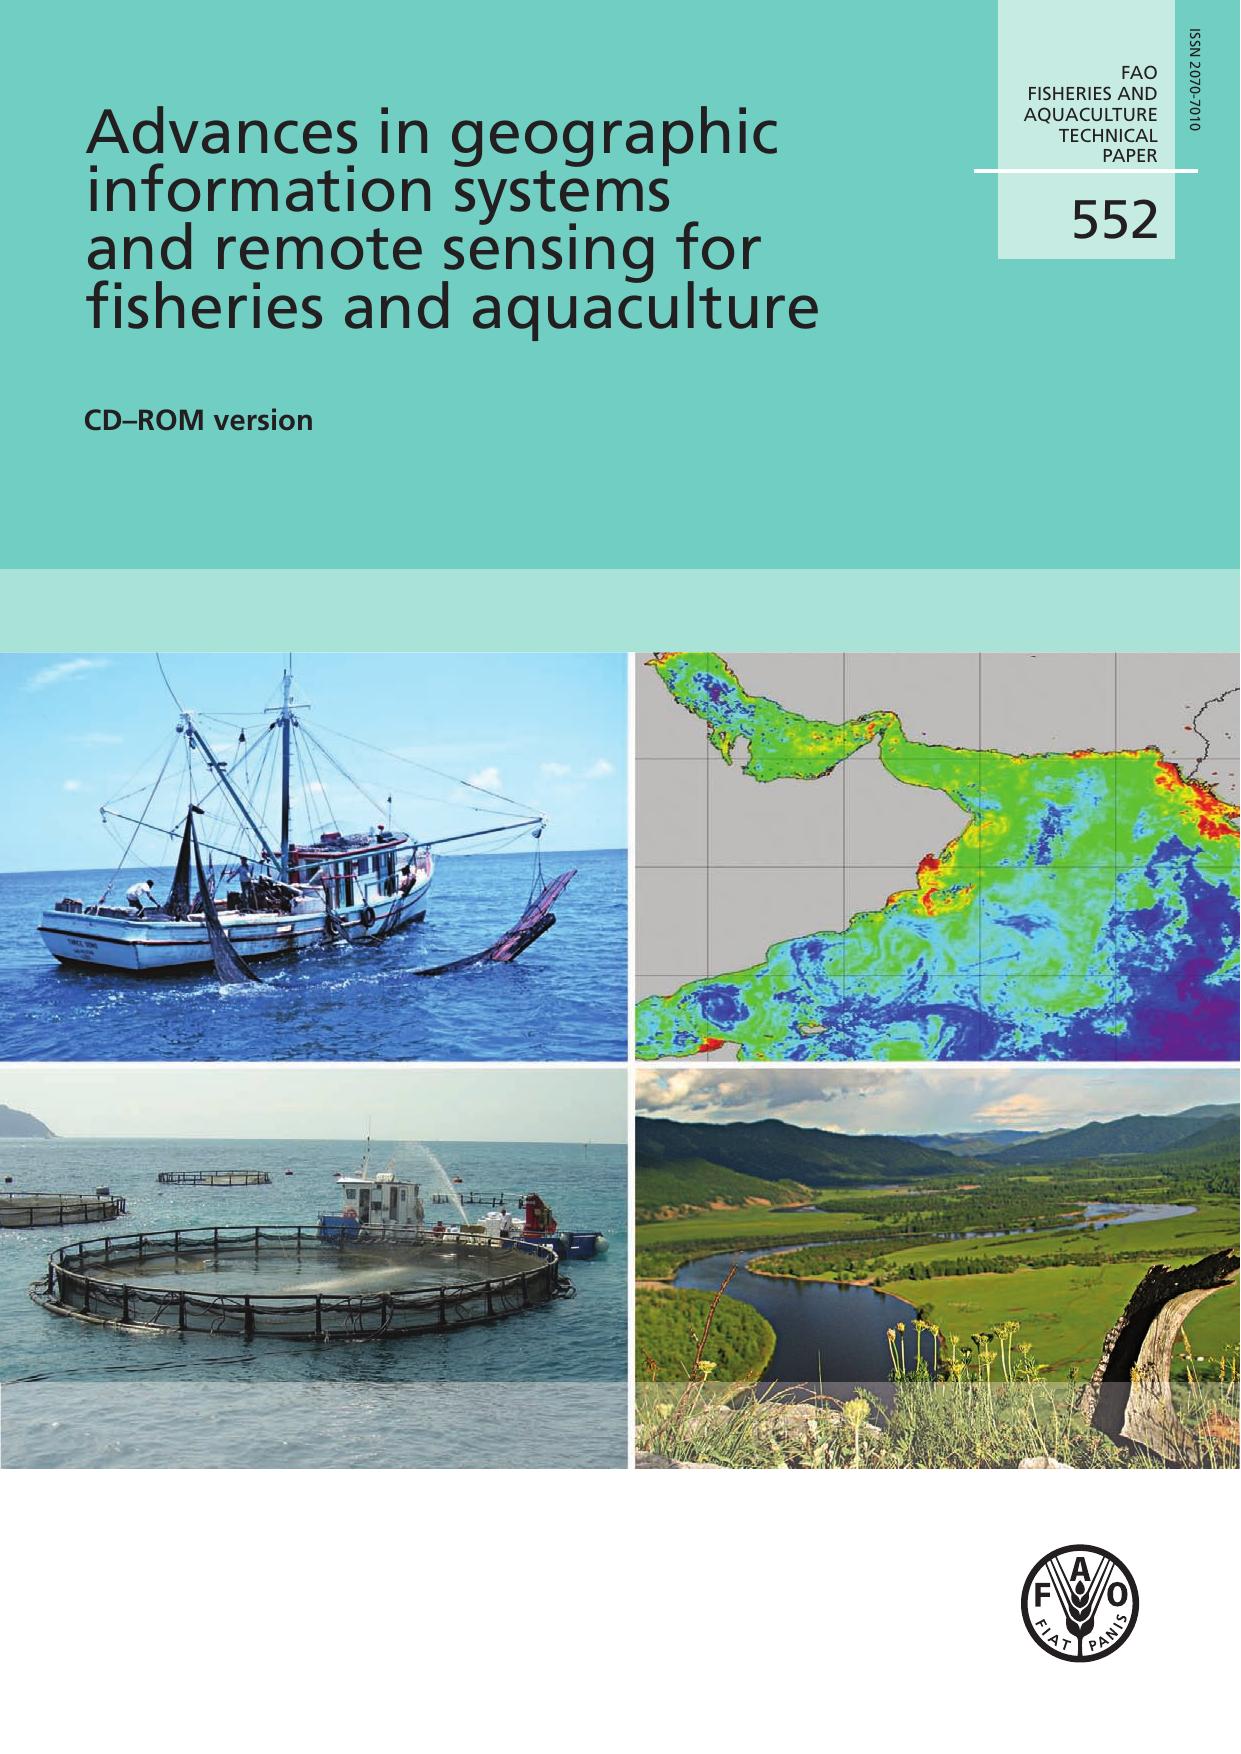 Advances in geographic information systems and remote sensing for fisheries and aquaculture. CD-ROM version.